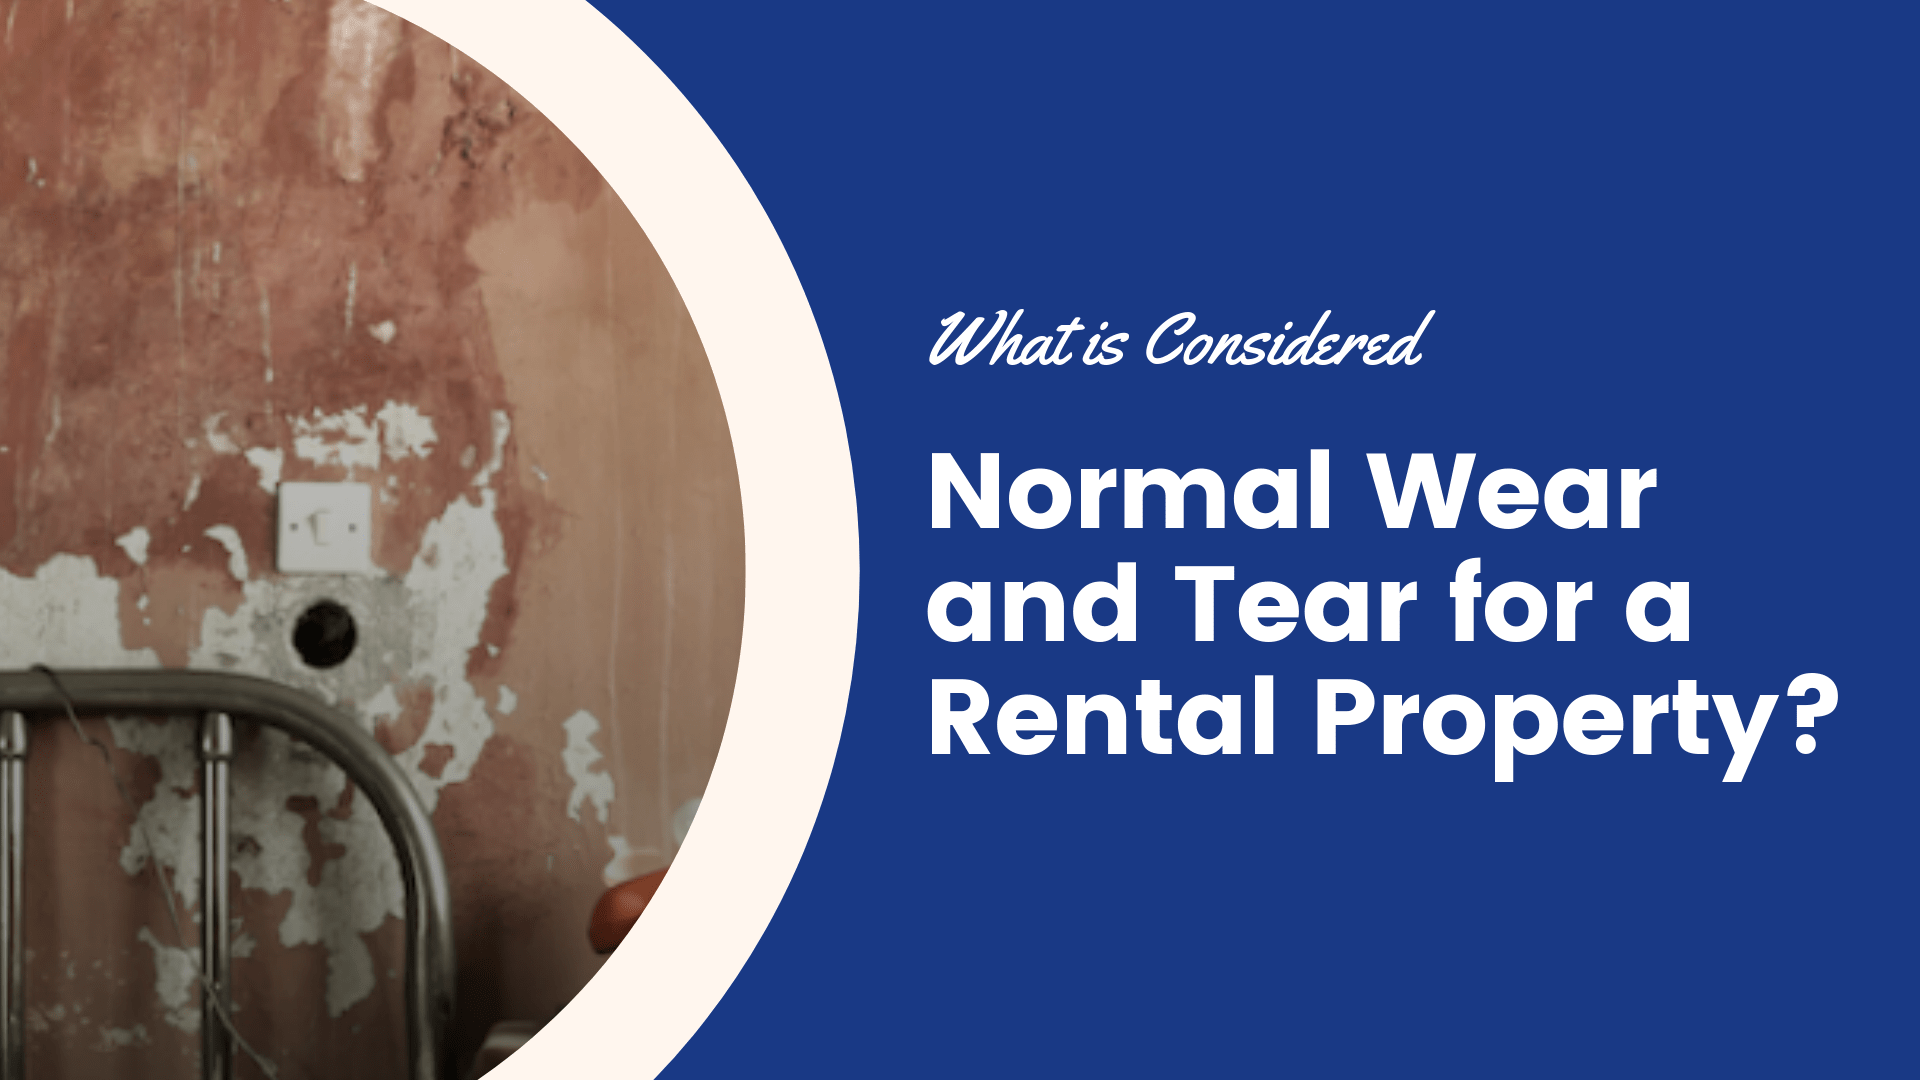 What Is Considered Normal Wear and Tear?